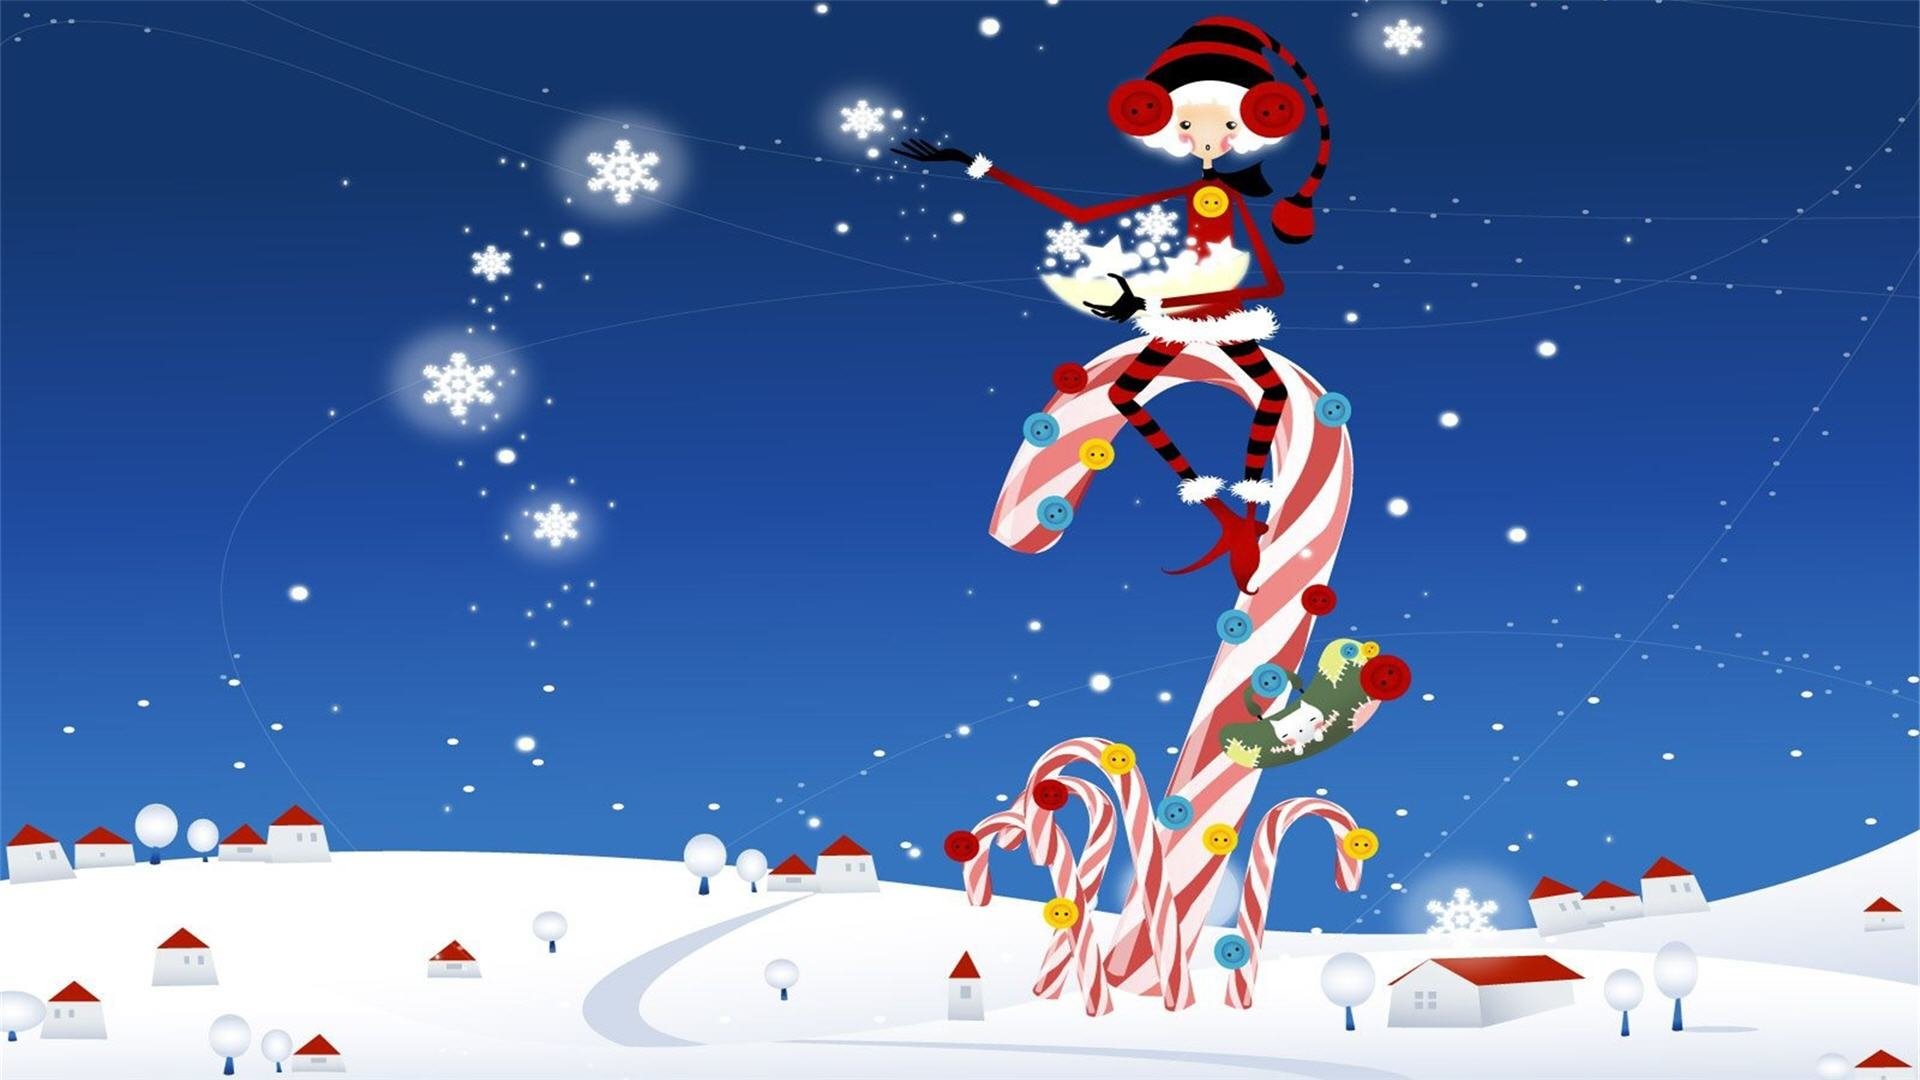 Live wallpaper Christmas Snoopy DOWNLOAD FREE 1241107867